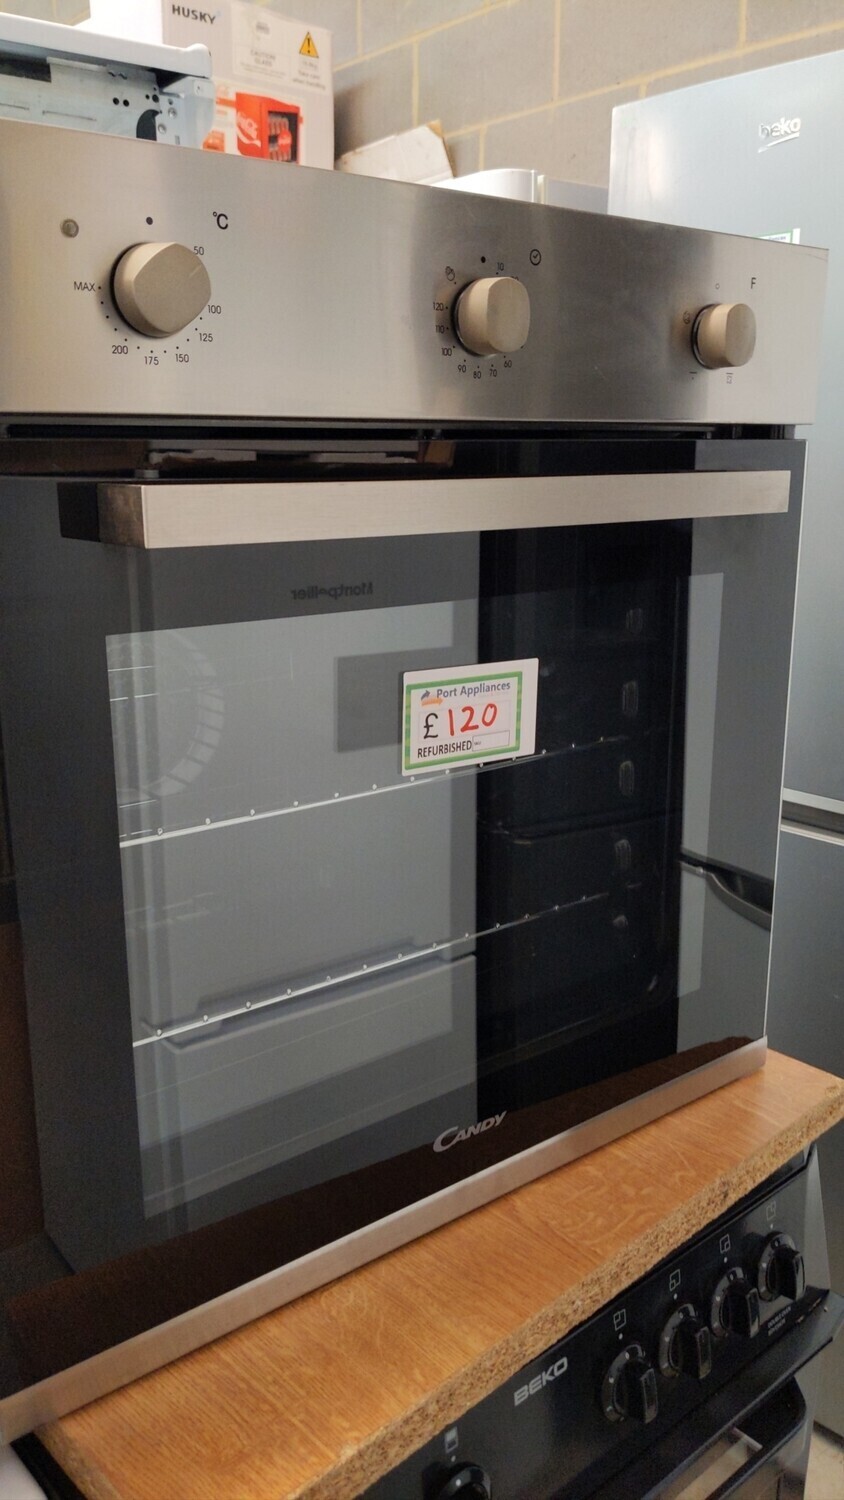 Candy 60cm Single Electric Built in Fan Oven - Refurbished